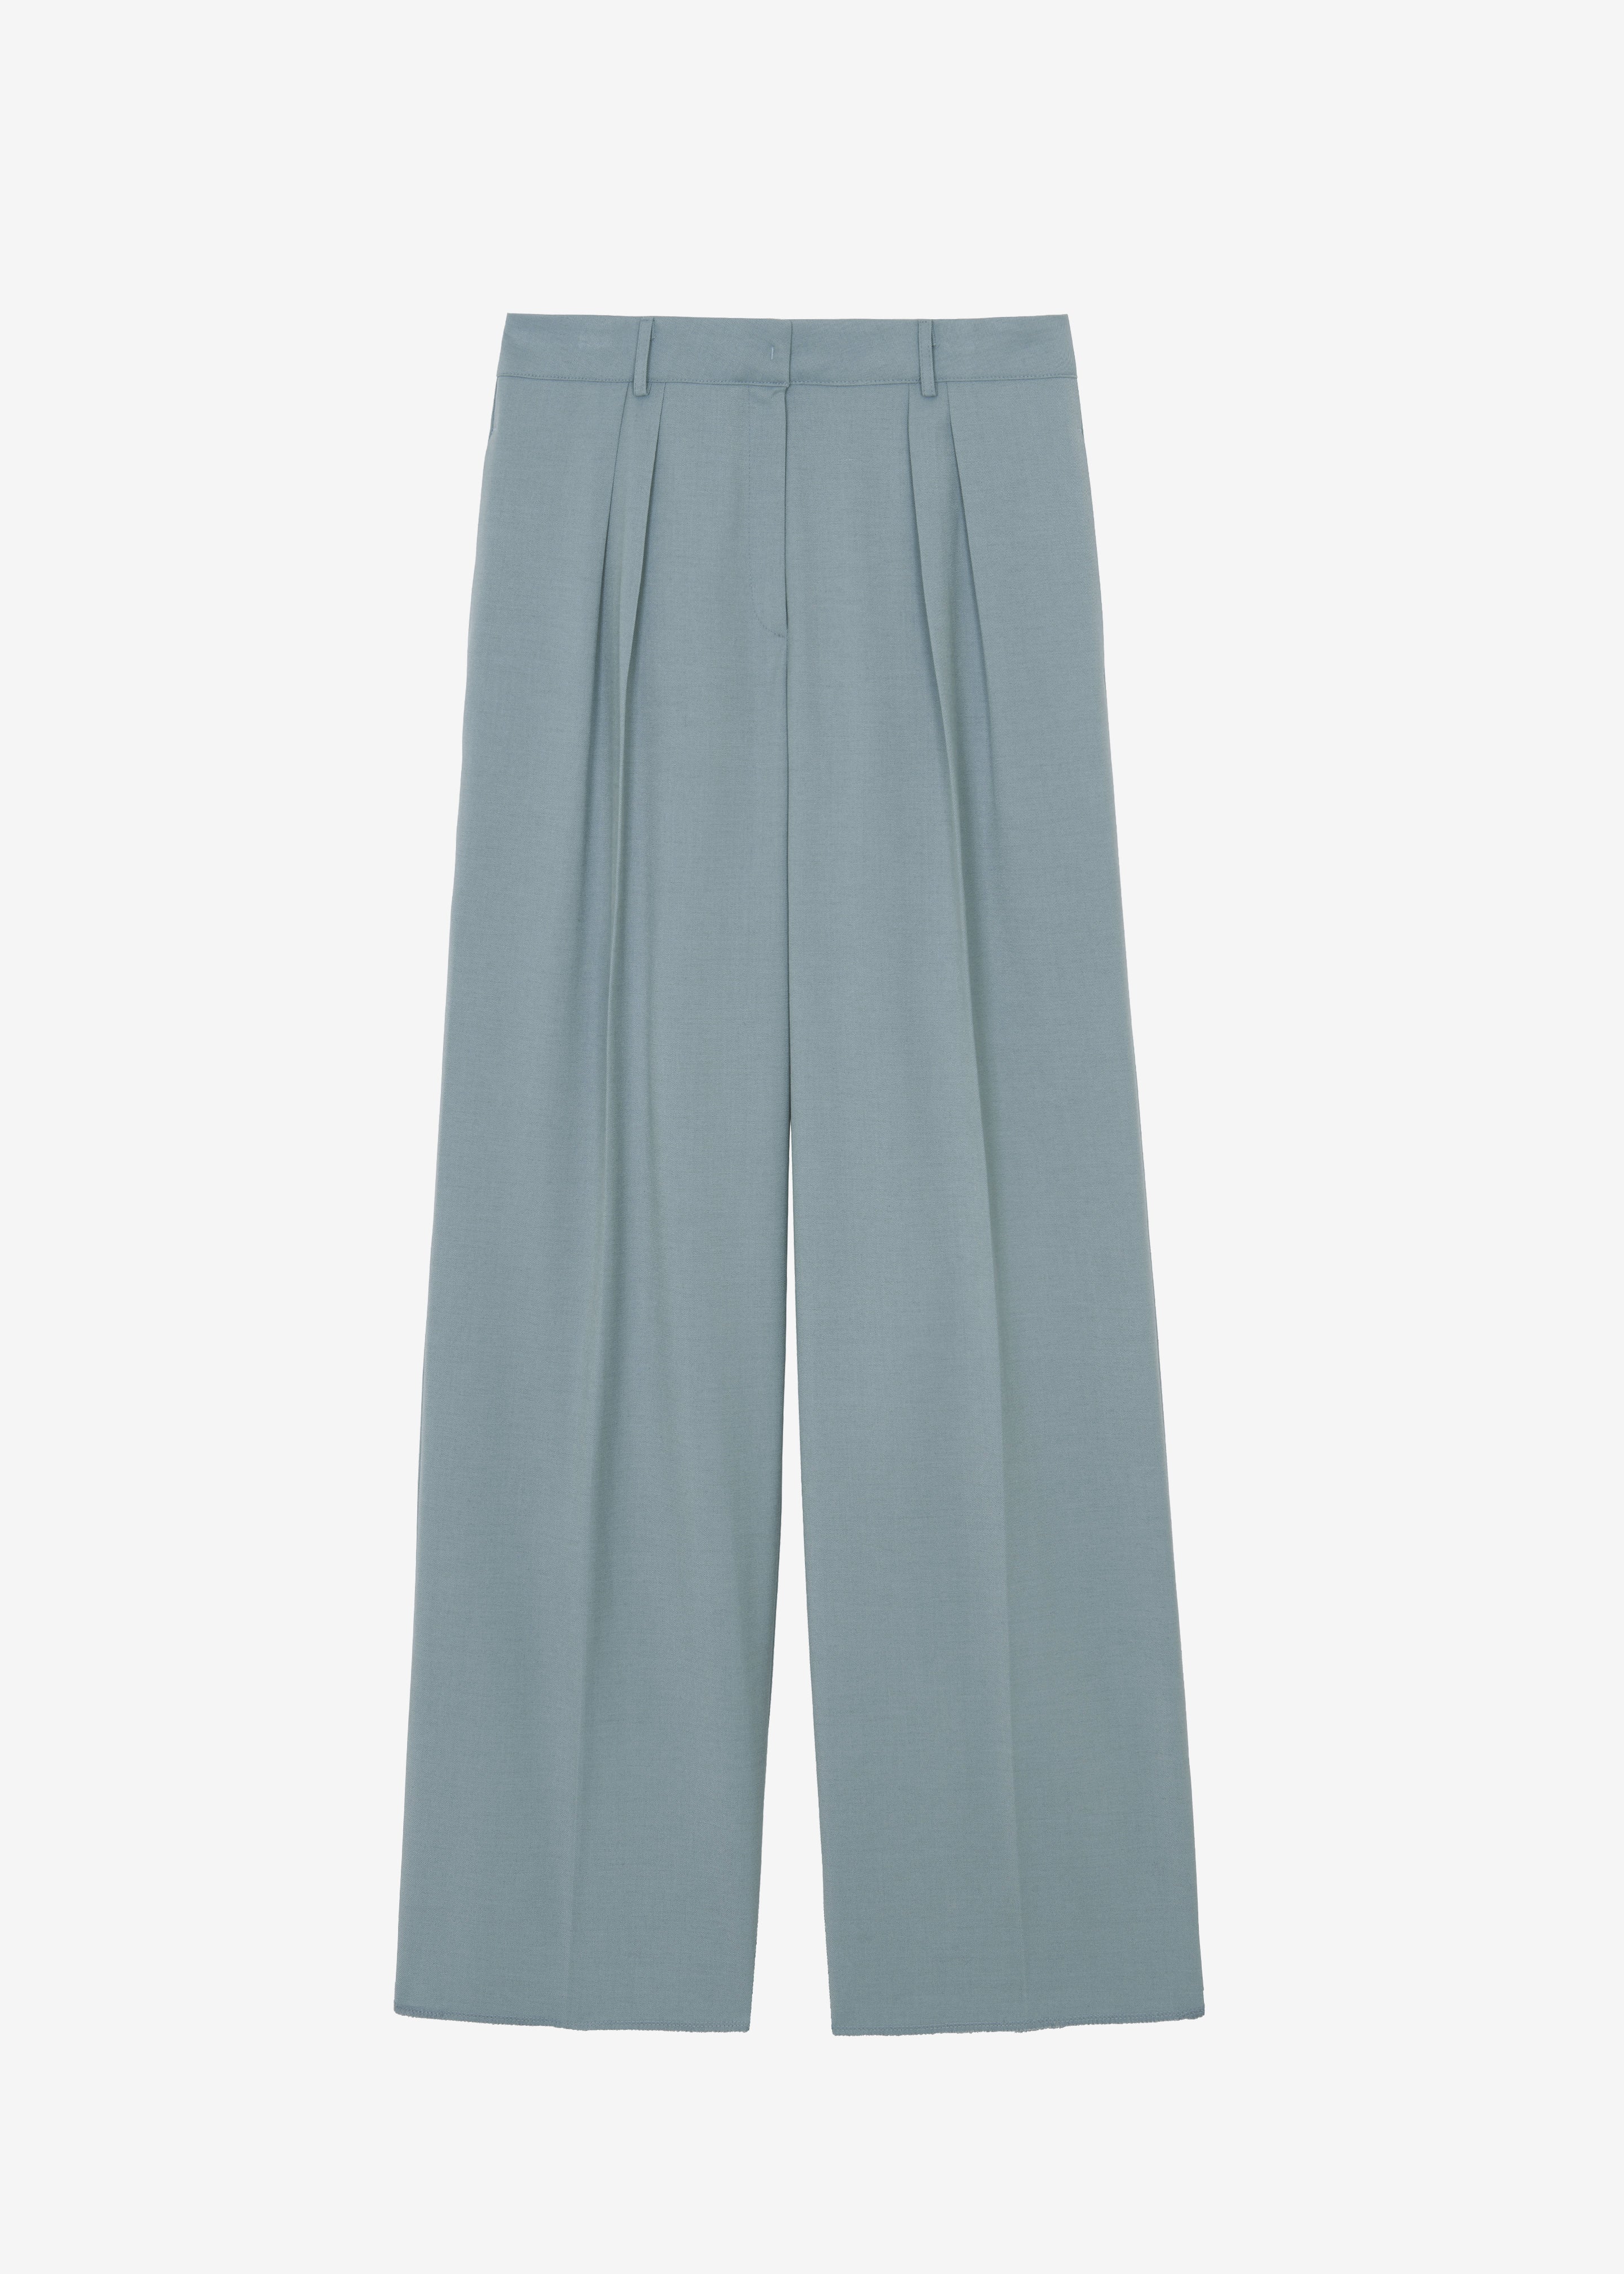 Spencer Pleated Pants - Dusty Blue - 17